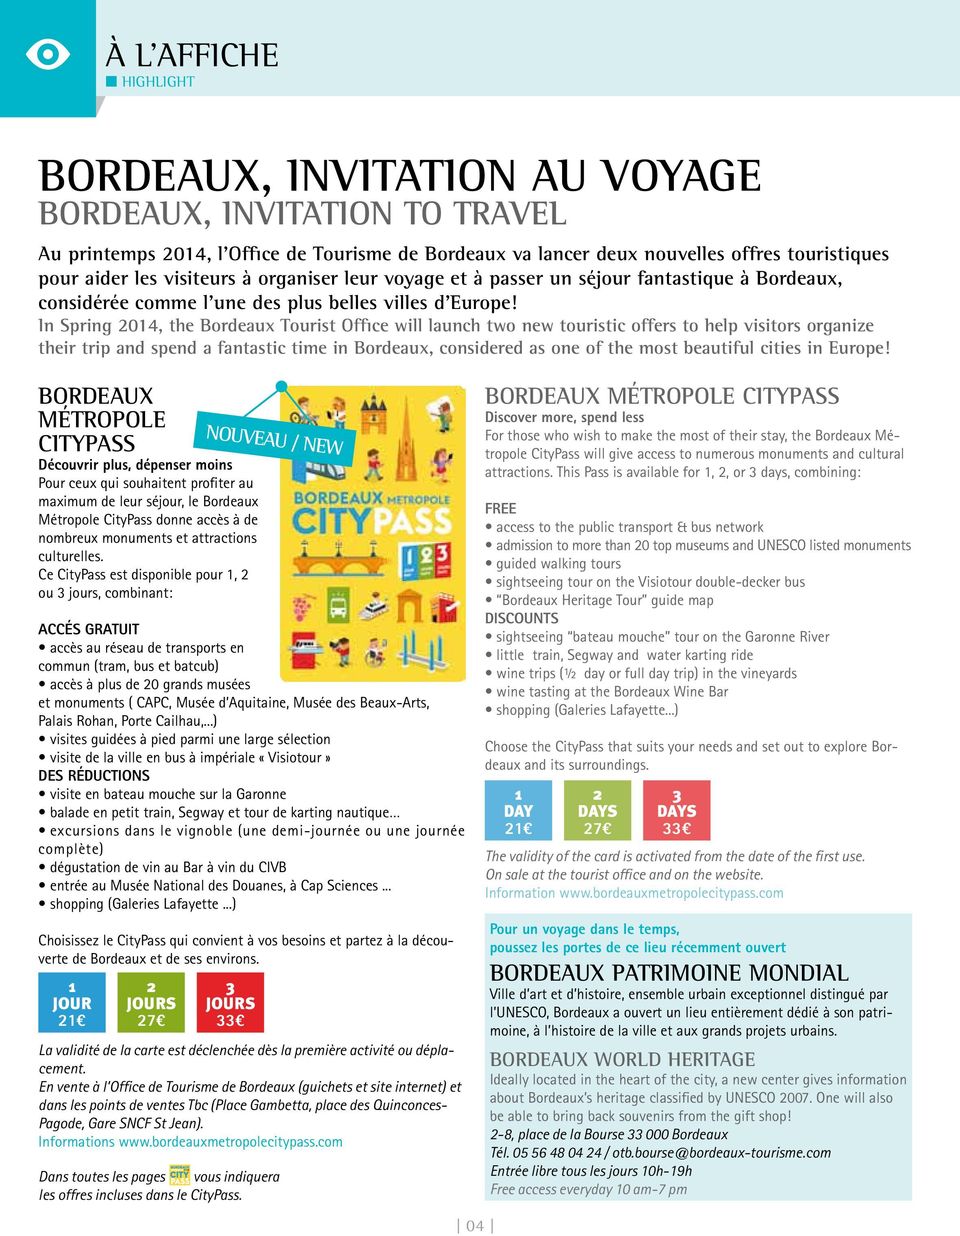 In Spring 2014, the Bordeaux Tourist Office will launch two new touristic offers to help visitors organize their trip and spend a fantastic time in Bordeaux, considered as one of the most beautiful